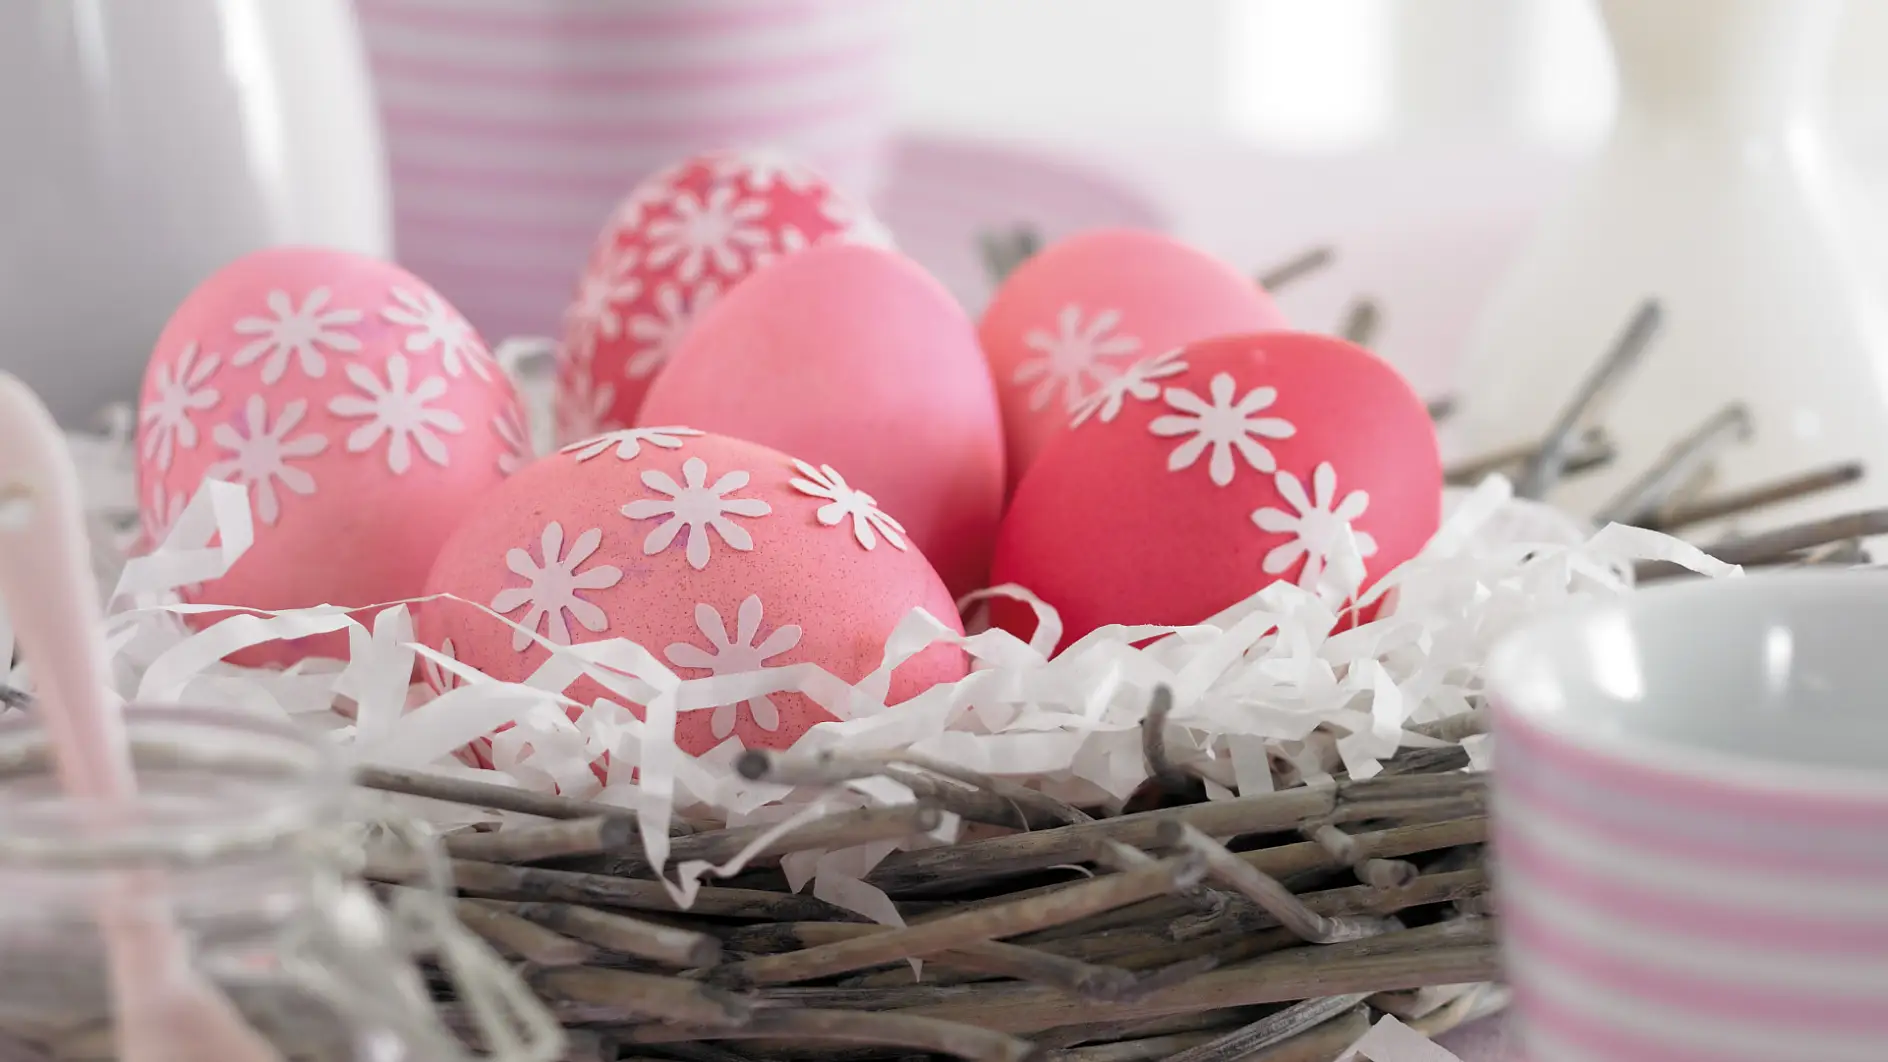 Isn't that lovely: Decorate your Easter eggs with punch-out paper flowers - they're easy to attach.